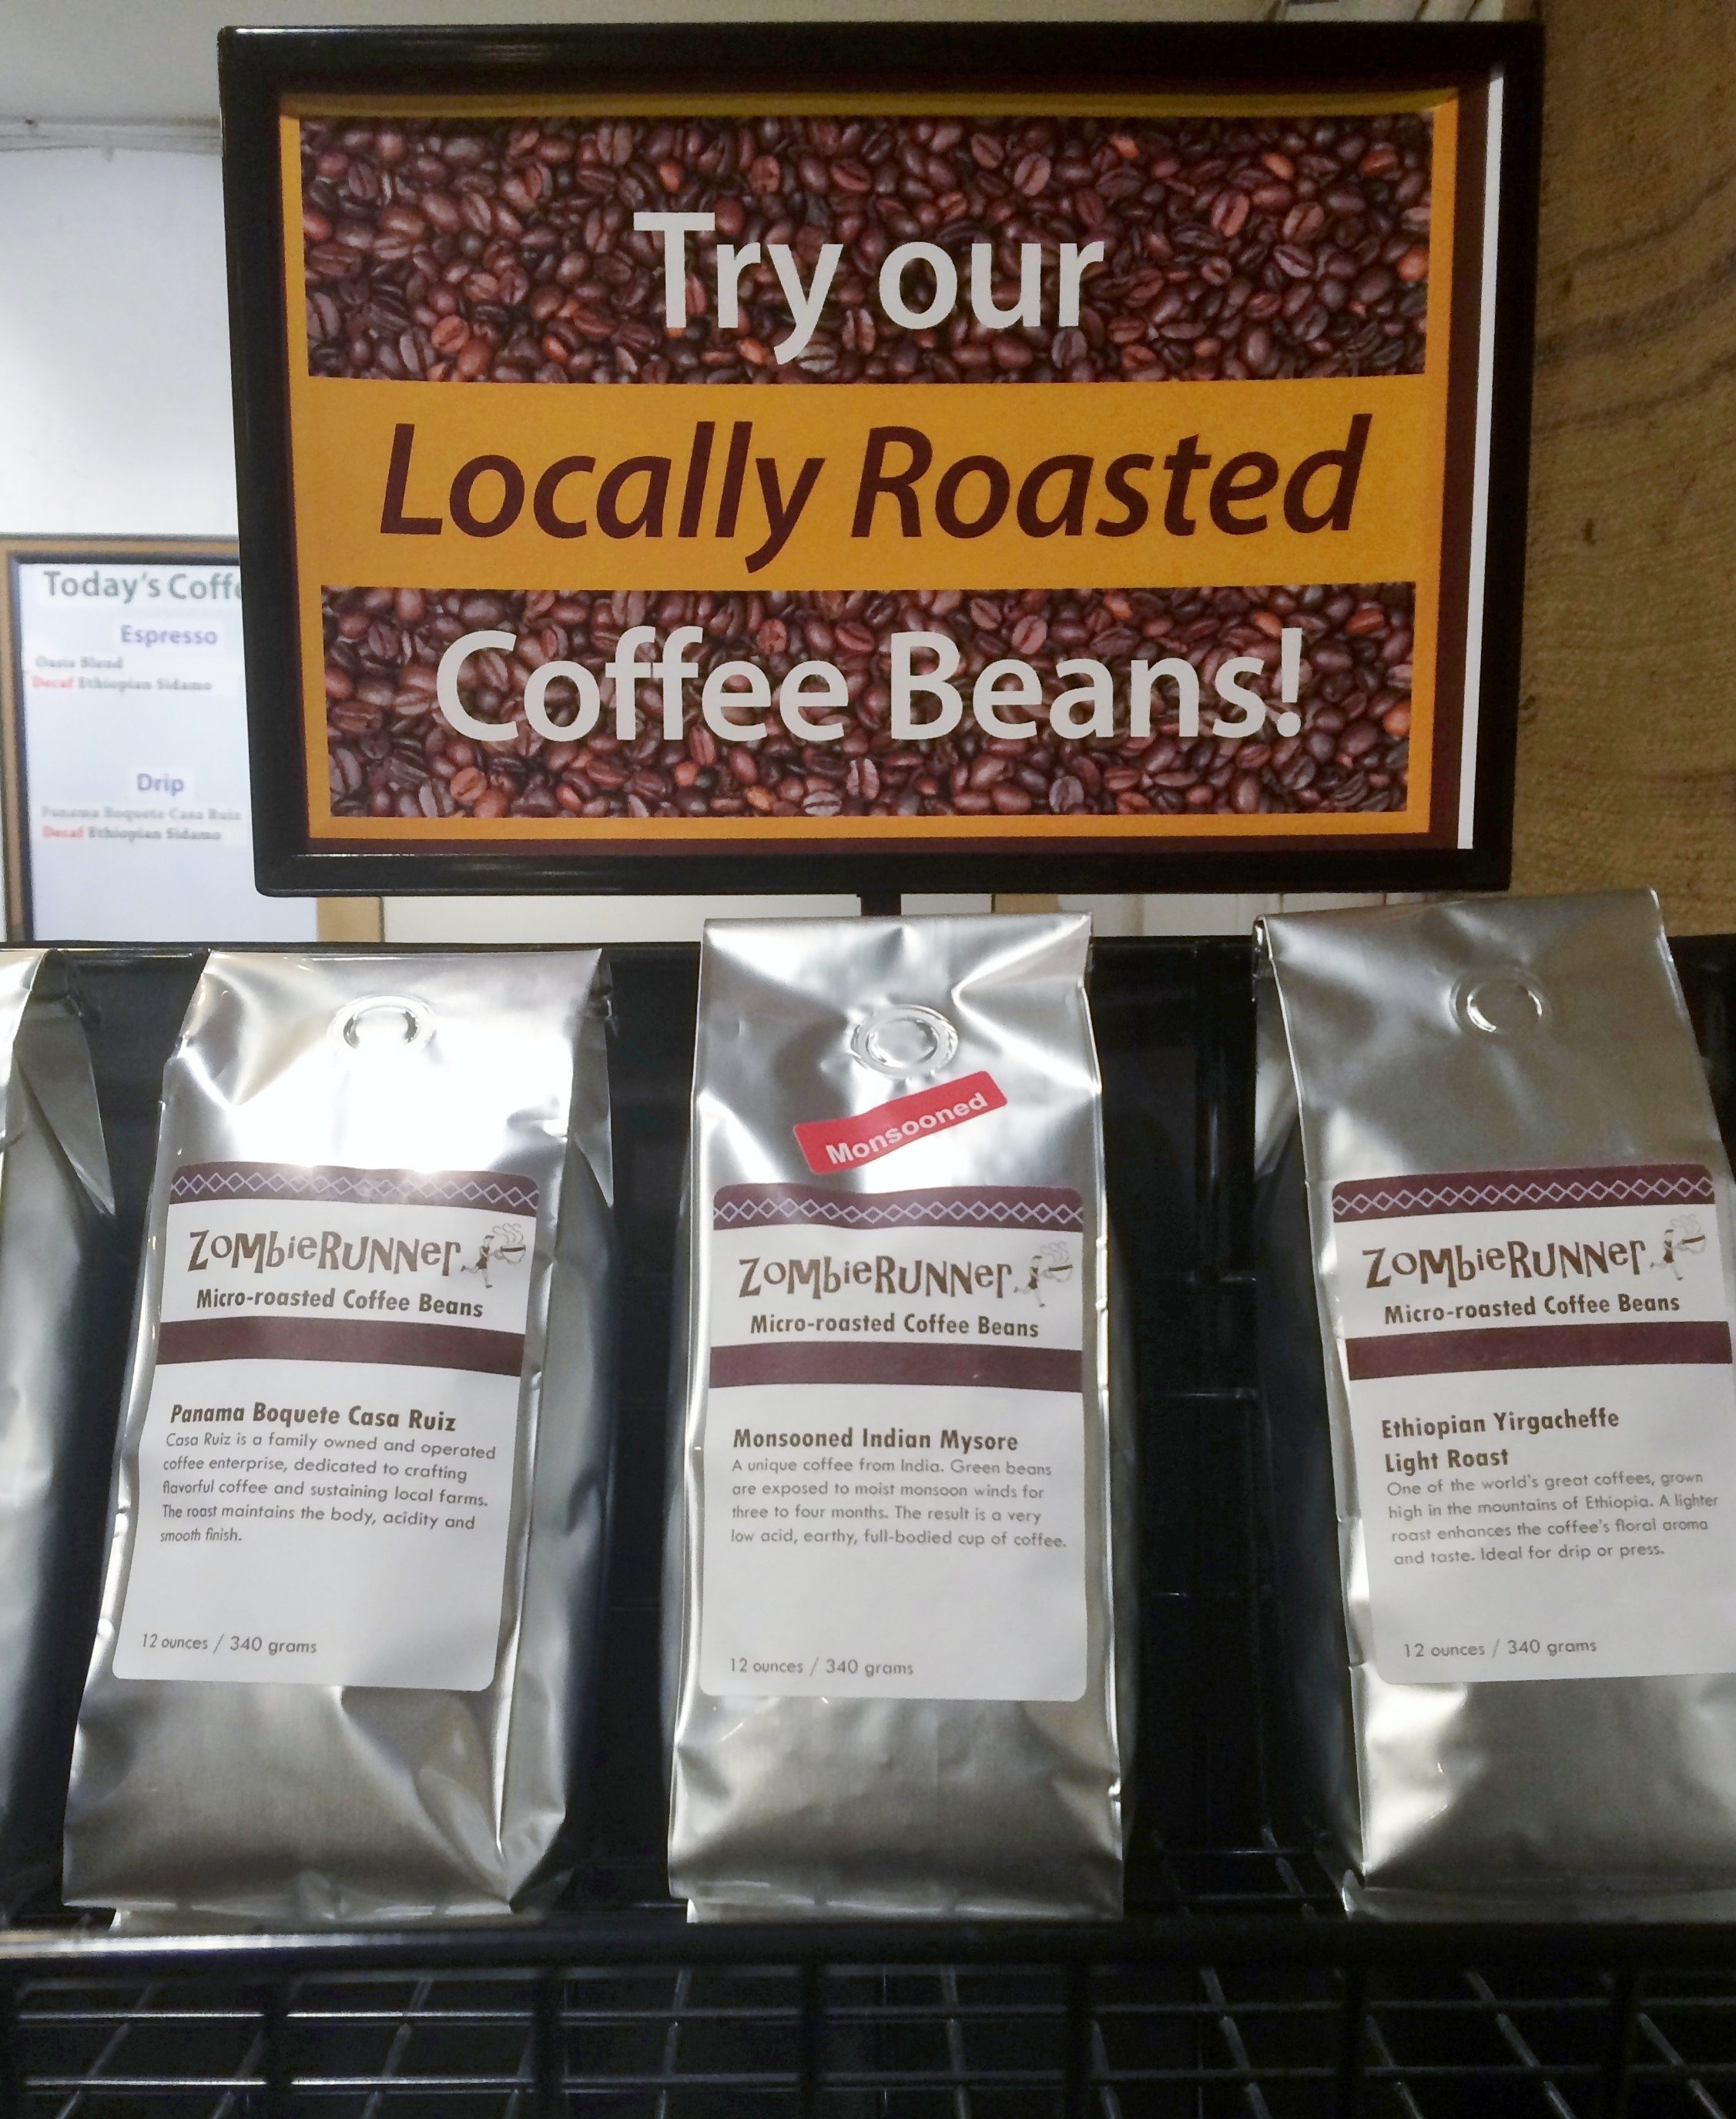 Bags of ZombieRunner coffee beans